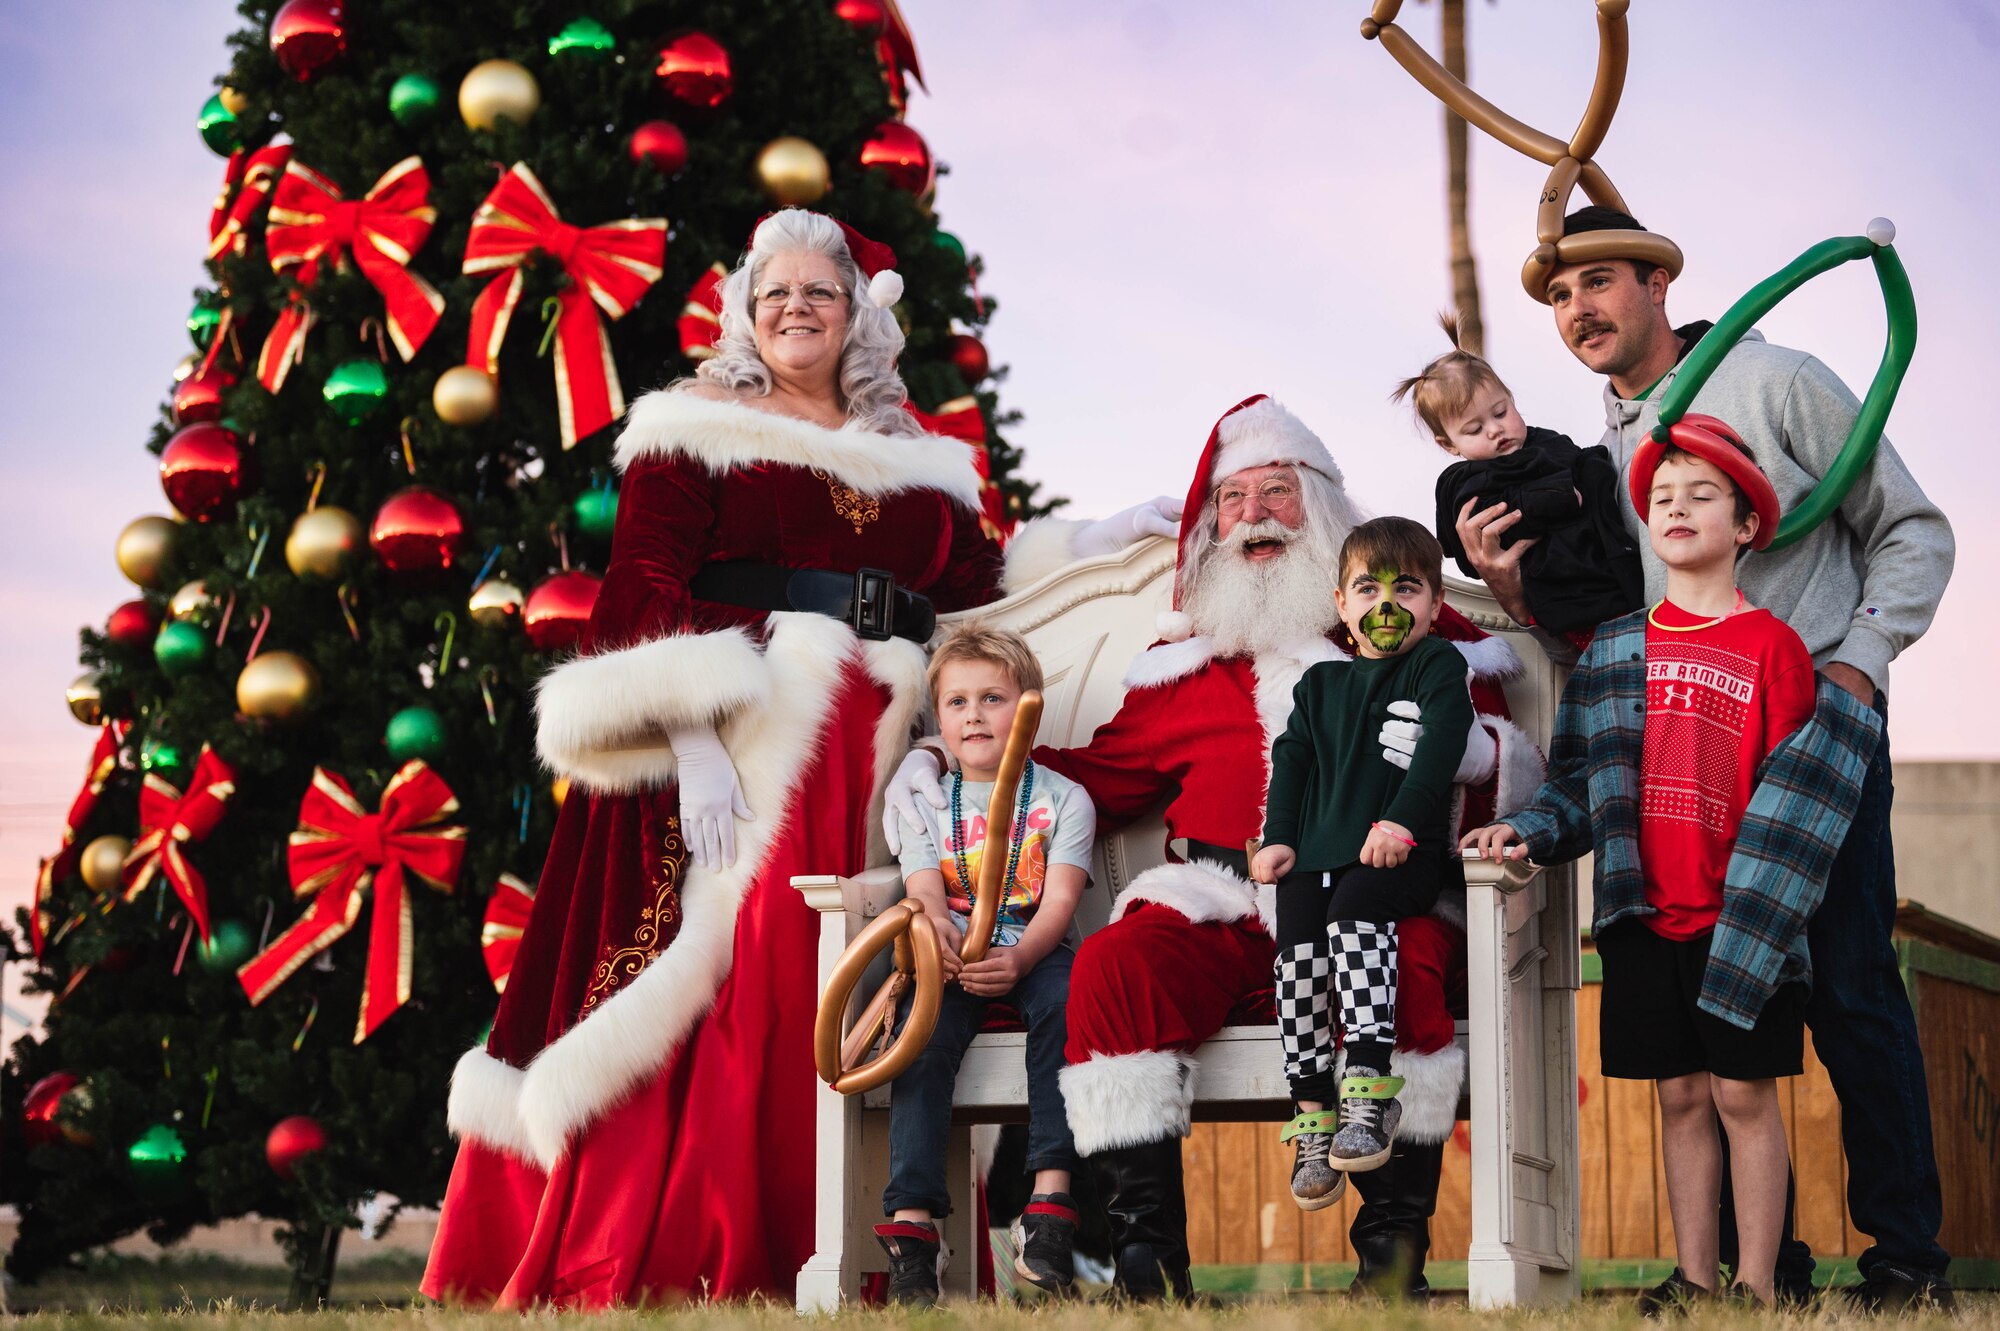 Santa Claus and Mrs. Claus impersonators pose for a photo with service members and their families, Dec. 8, 2023, at Luke Air Force Base, Arizona. Holiday Magic is an annual event with food, games, and holiday cheer for families at Luke AFB.